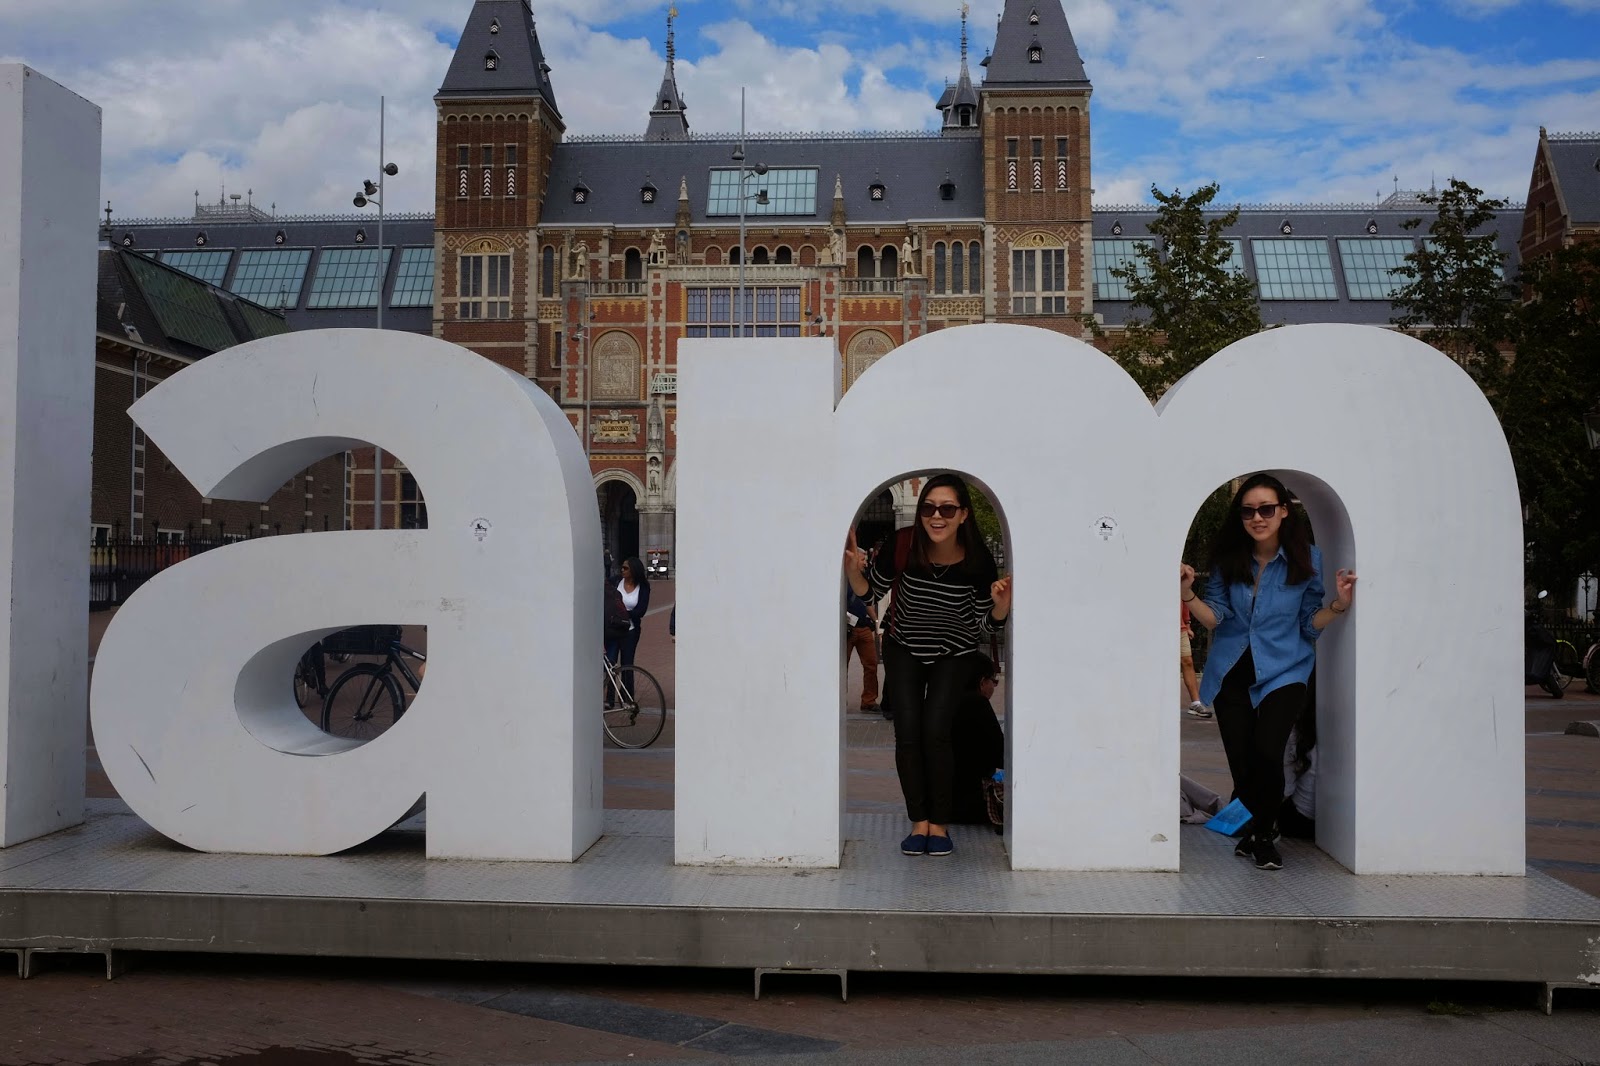 10 things to do in Amsterdam